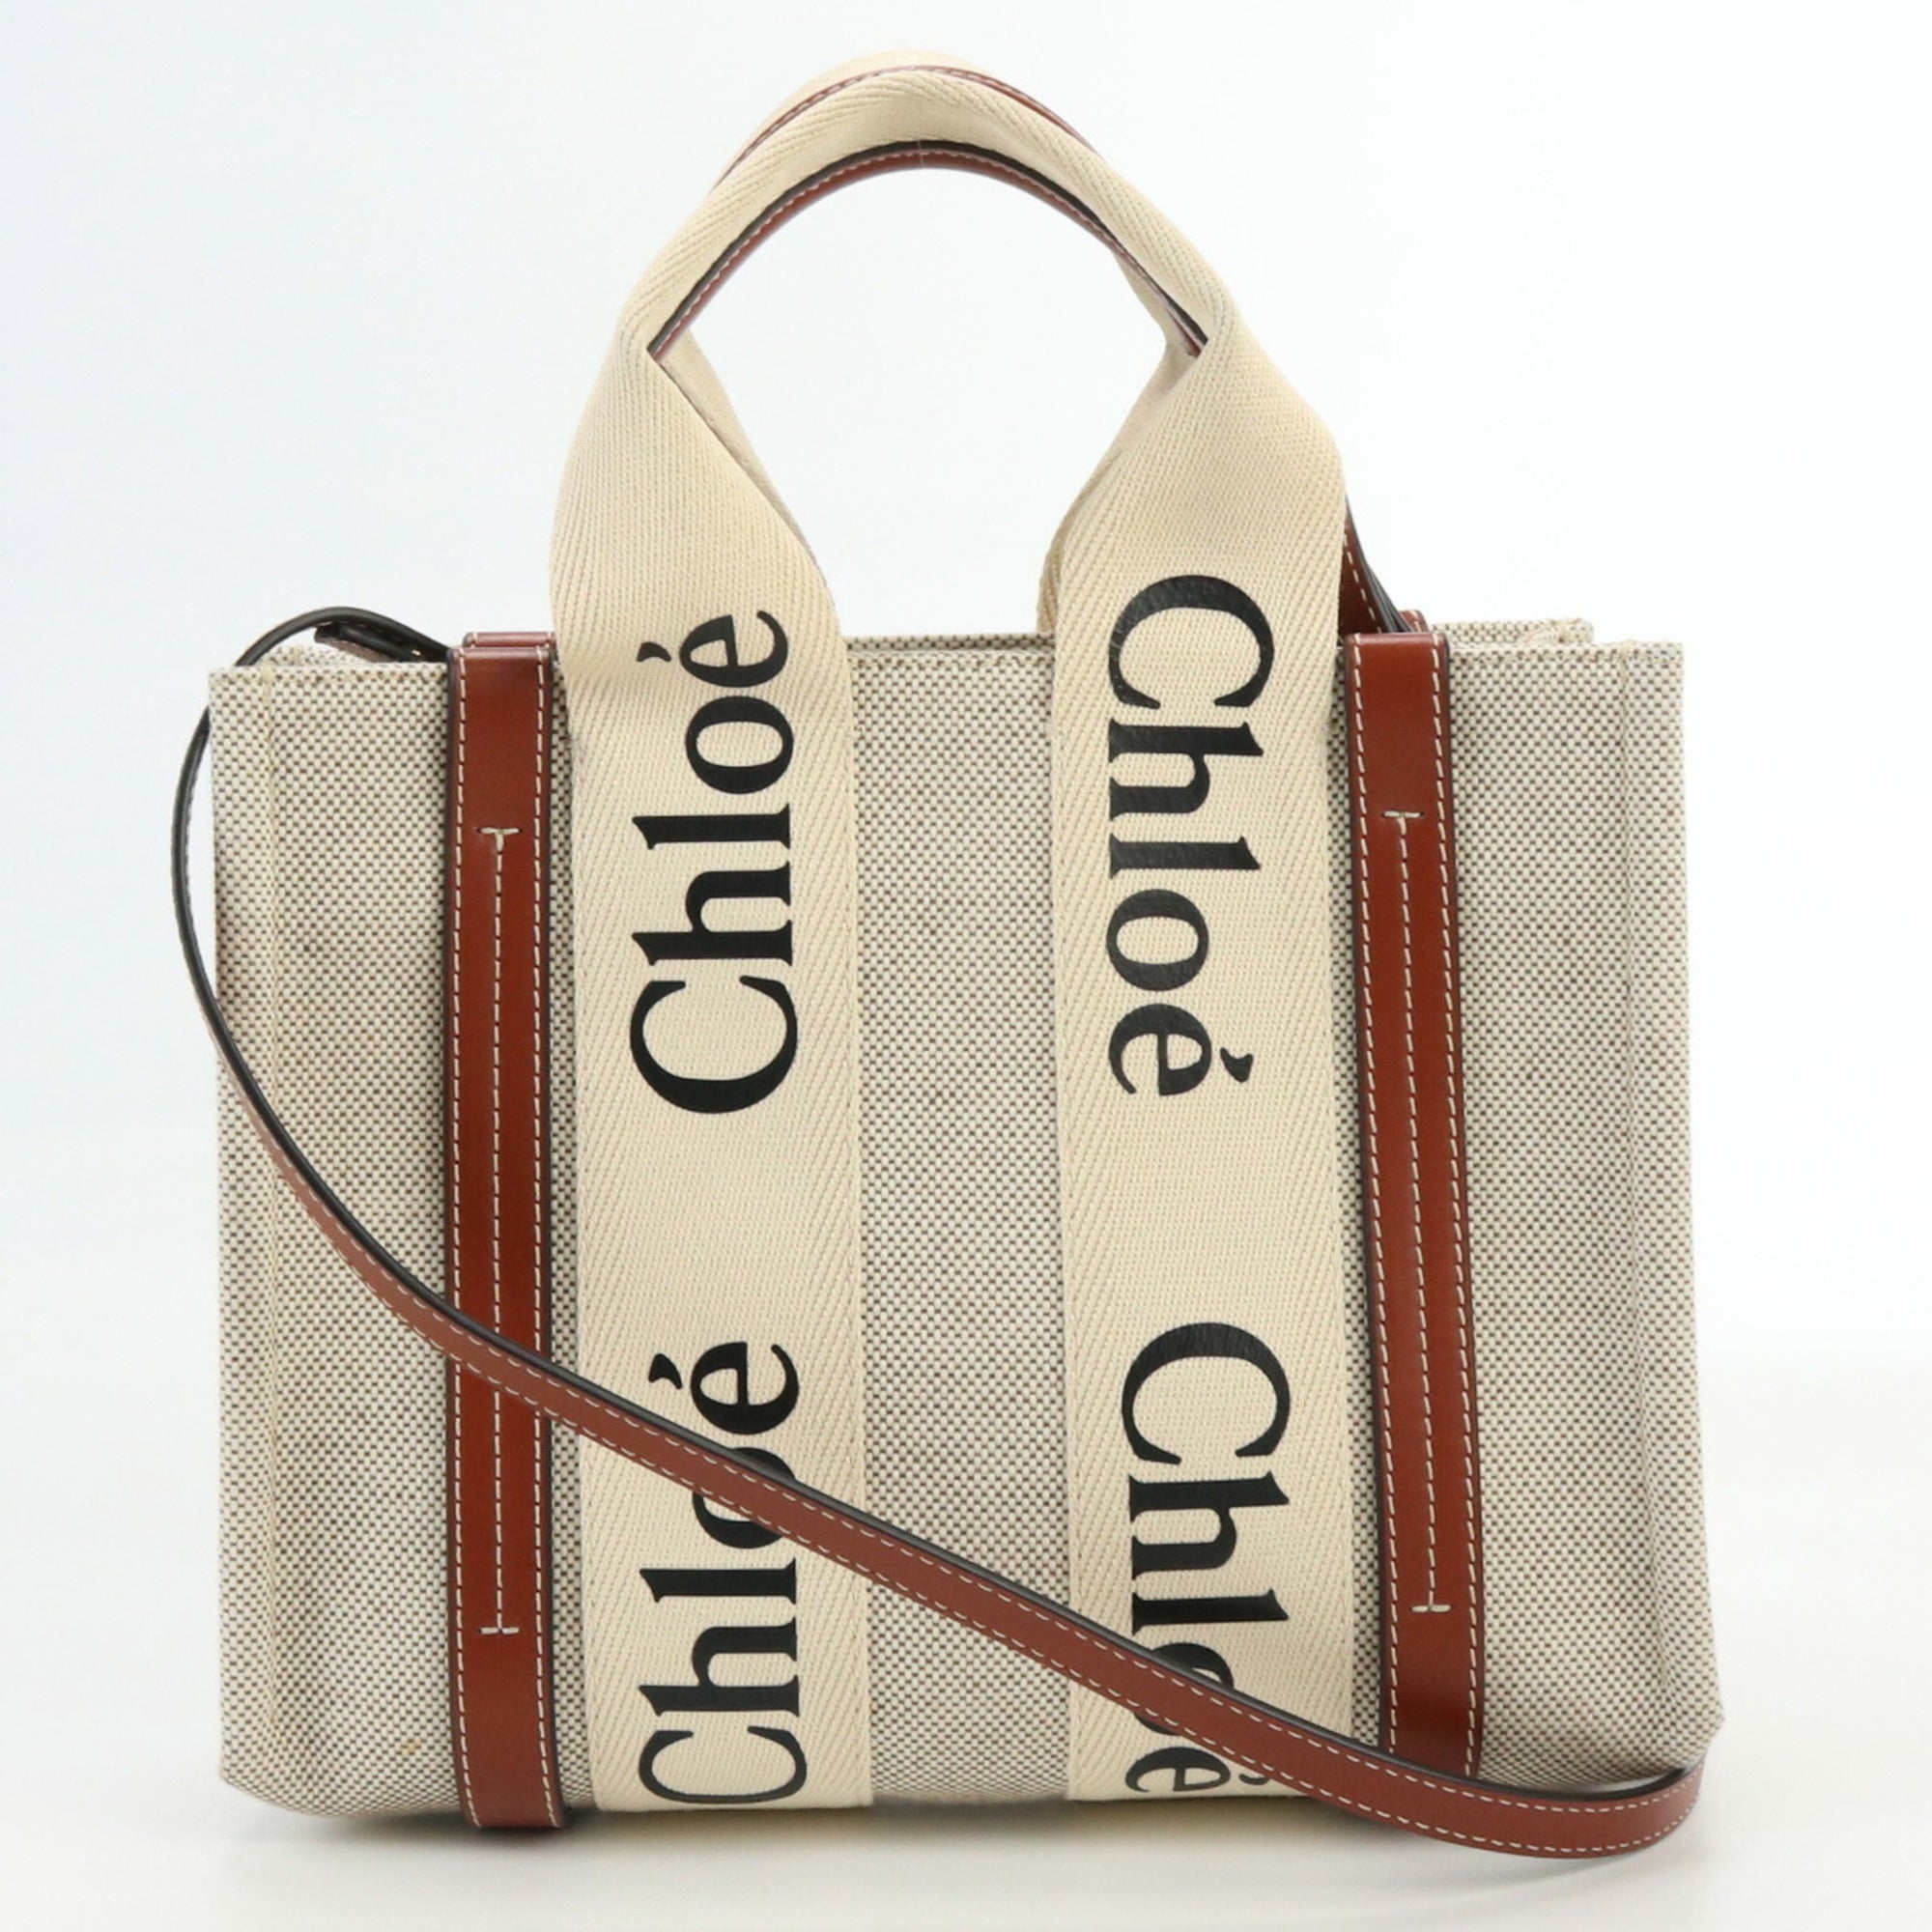 Replacement Shoulder/crossbody Strap for Chloe Woody Tote Bag -  Norway